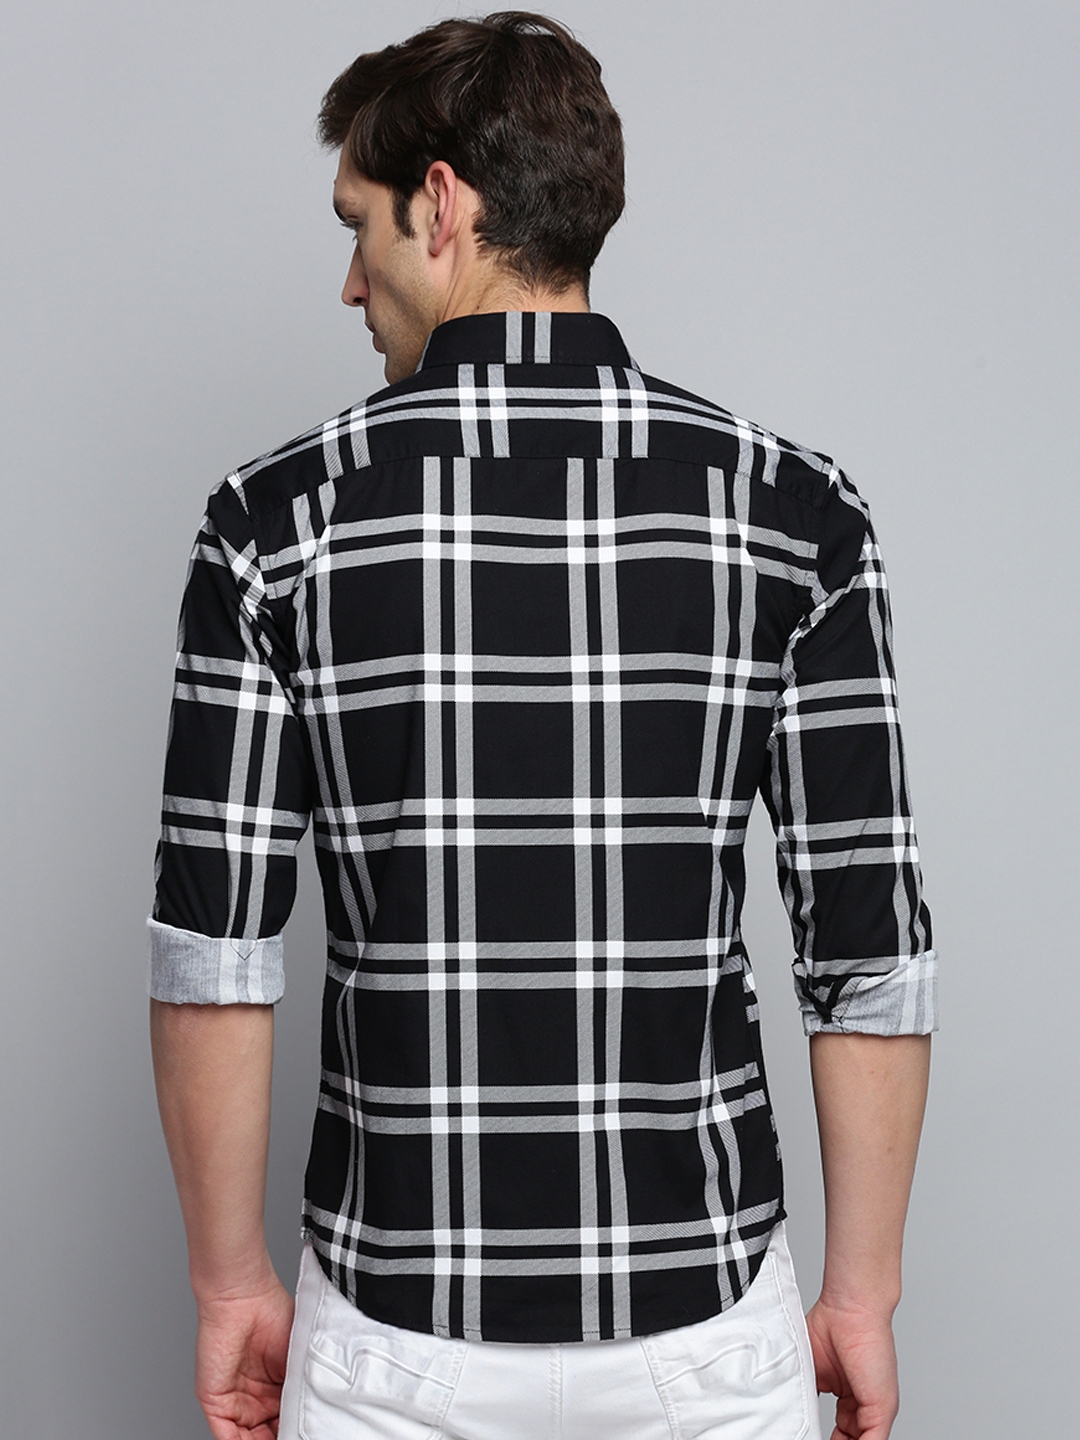 Showoff | SHOWOFF Men's Spread Collar Checked Black Classic Shirt 3